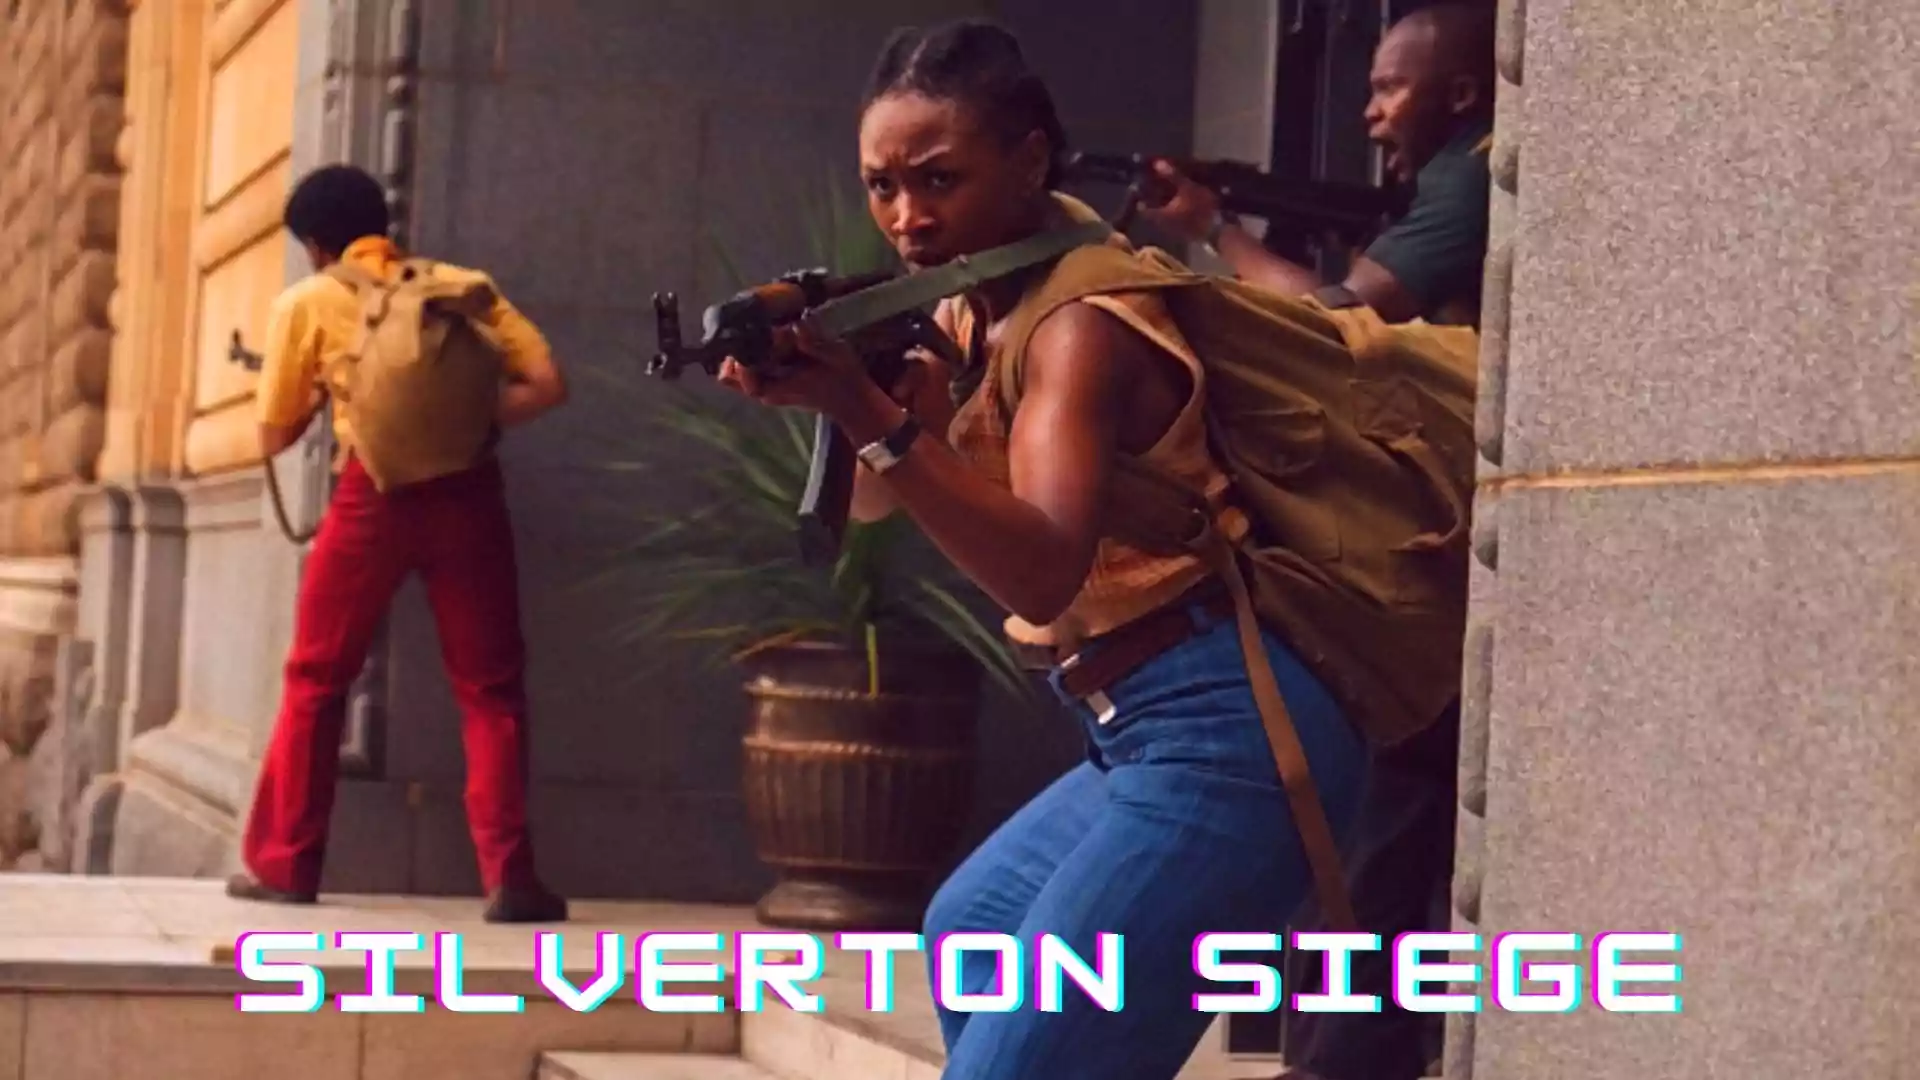 Silverton Siege Wallpaper and Images